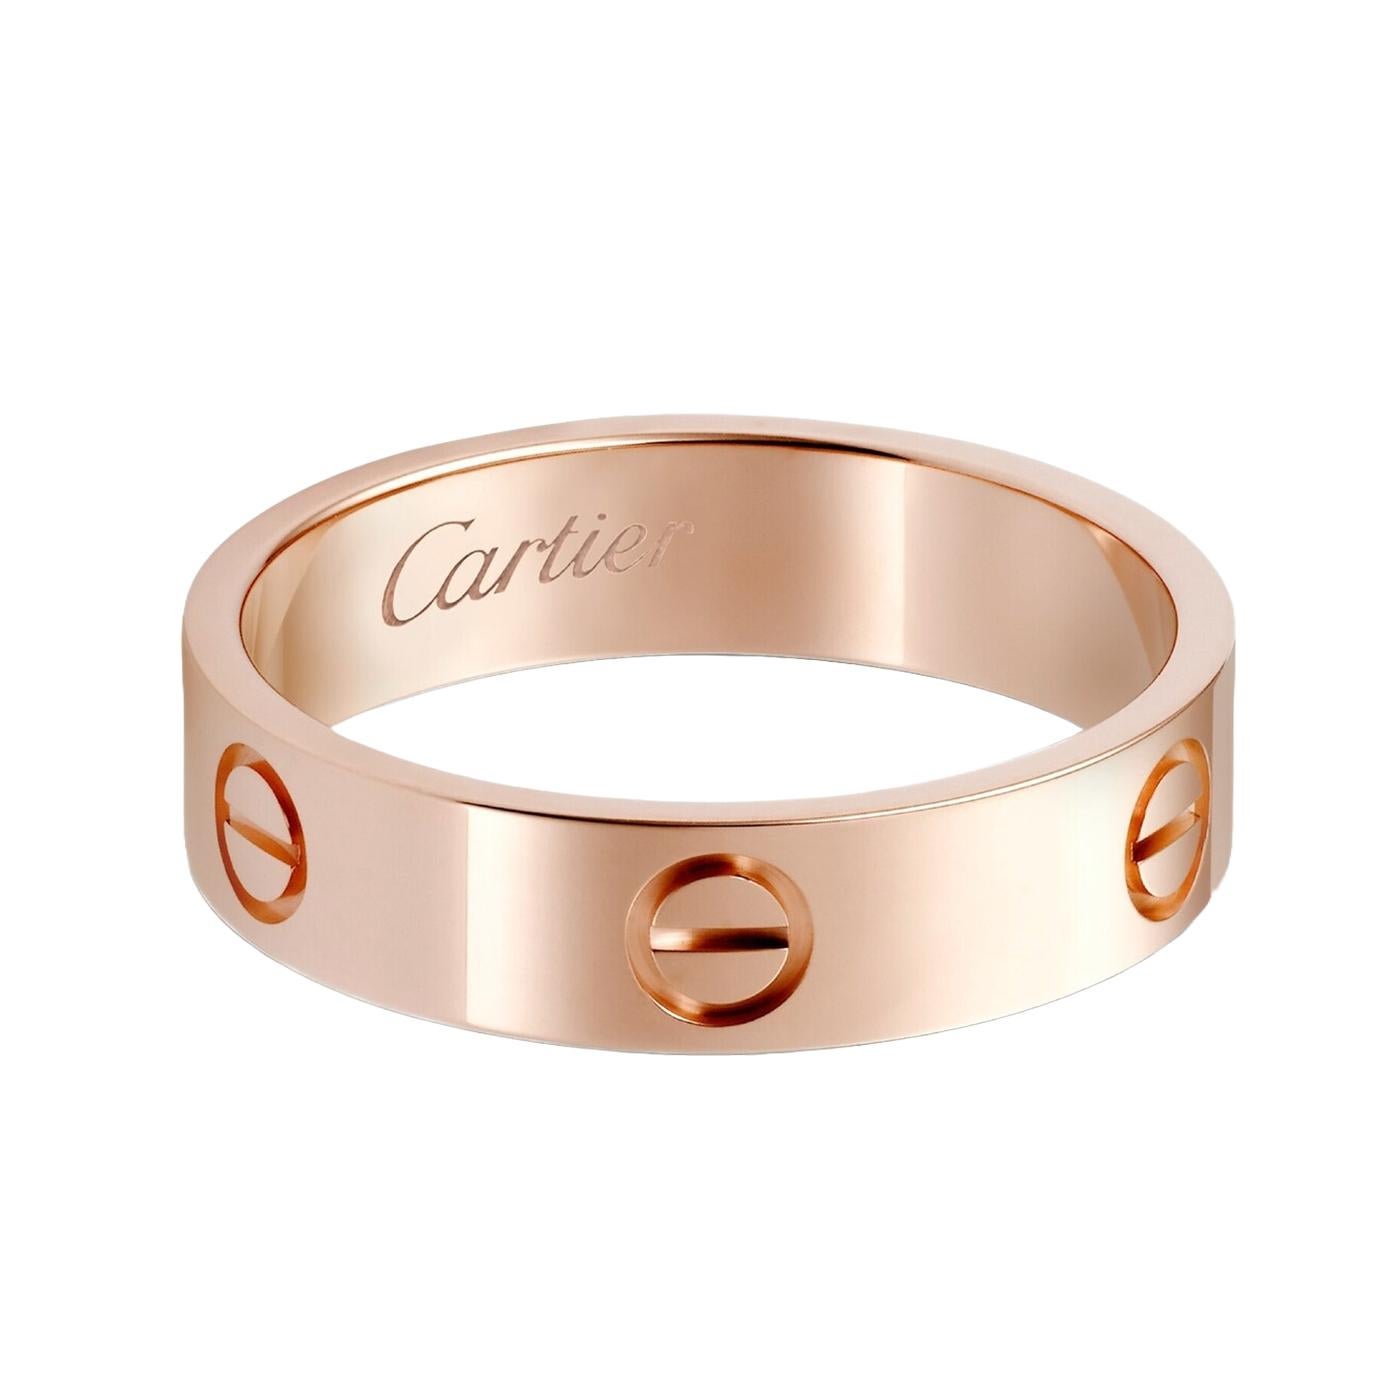 LOVE Ring, Rose Gold (750/1000). Width: 5.5 mm (for size 57).

Details:
Brand: Cartier
Style: Love Ring
Material: Rose Gold
Cartier Size: 57
Theme: Romantic, Love
Scope of Delivery: Box and Papers
Condition: New
Purchased: 2021

Occasion: